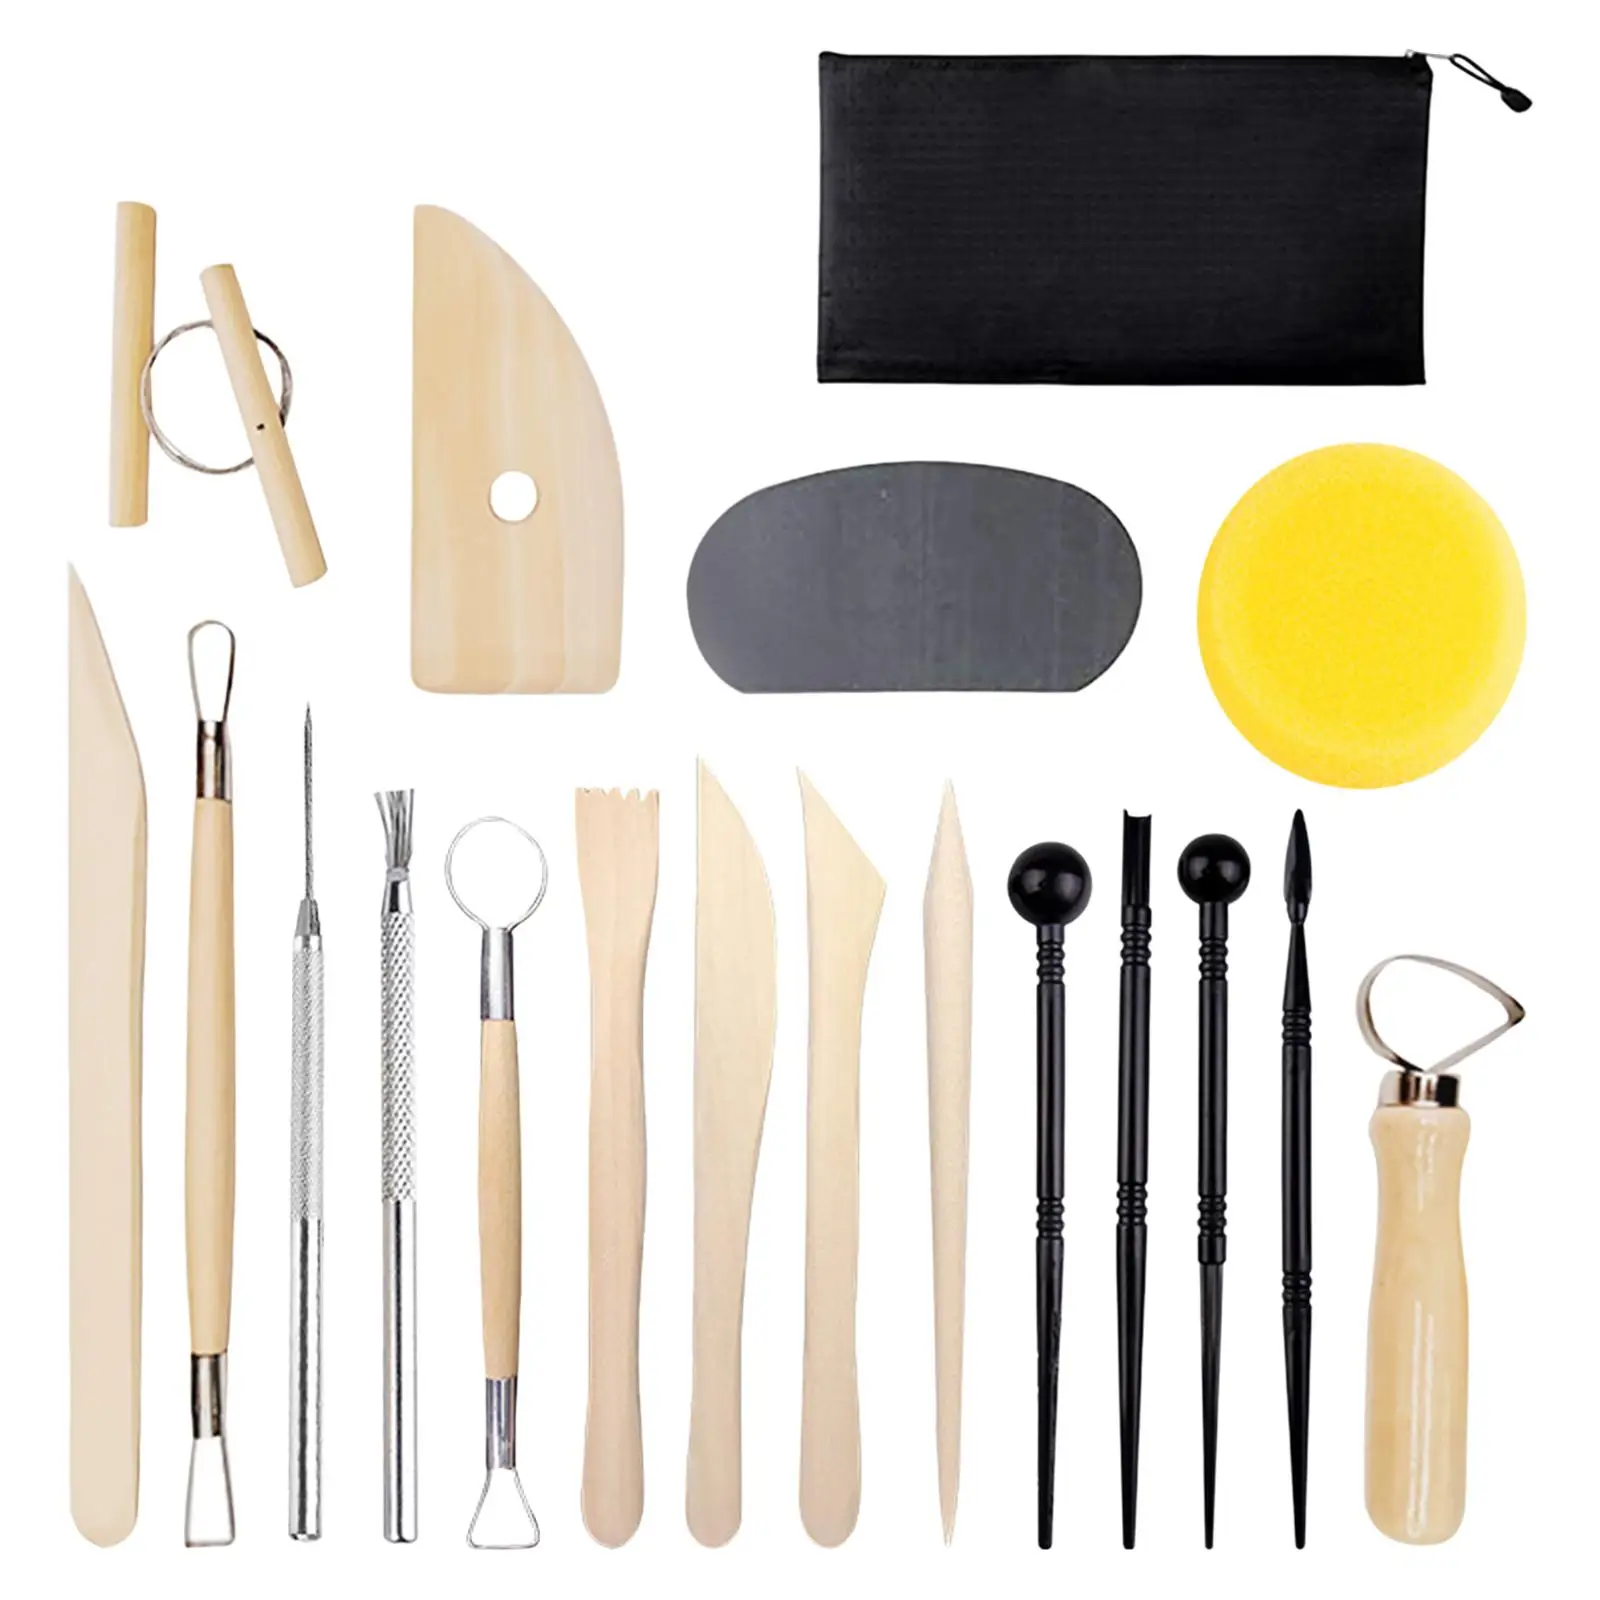 19x Clay Tools DIY Scraping Smoothing Ceramics Clay Sculpting Tools Pottery Carving Tool Set for Professional with Carrying Bag